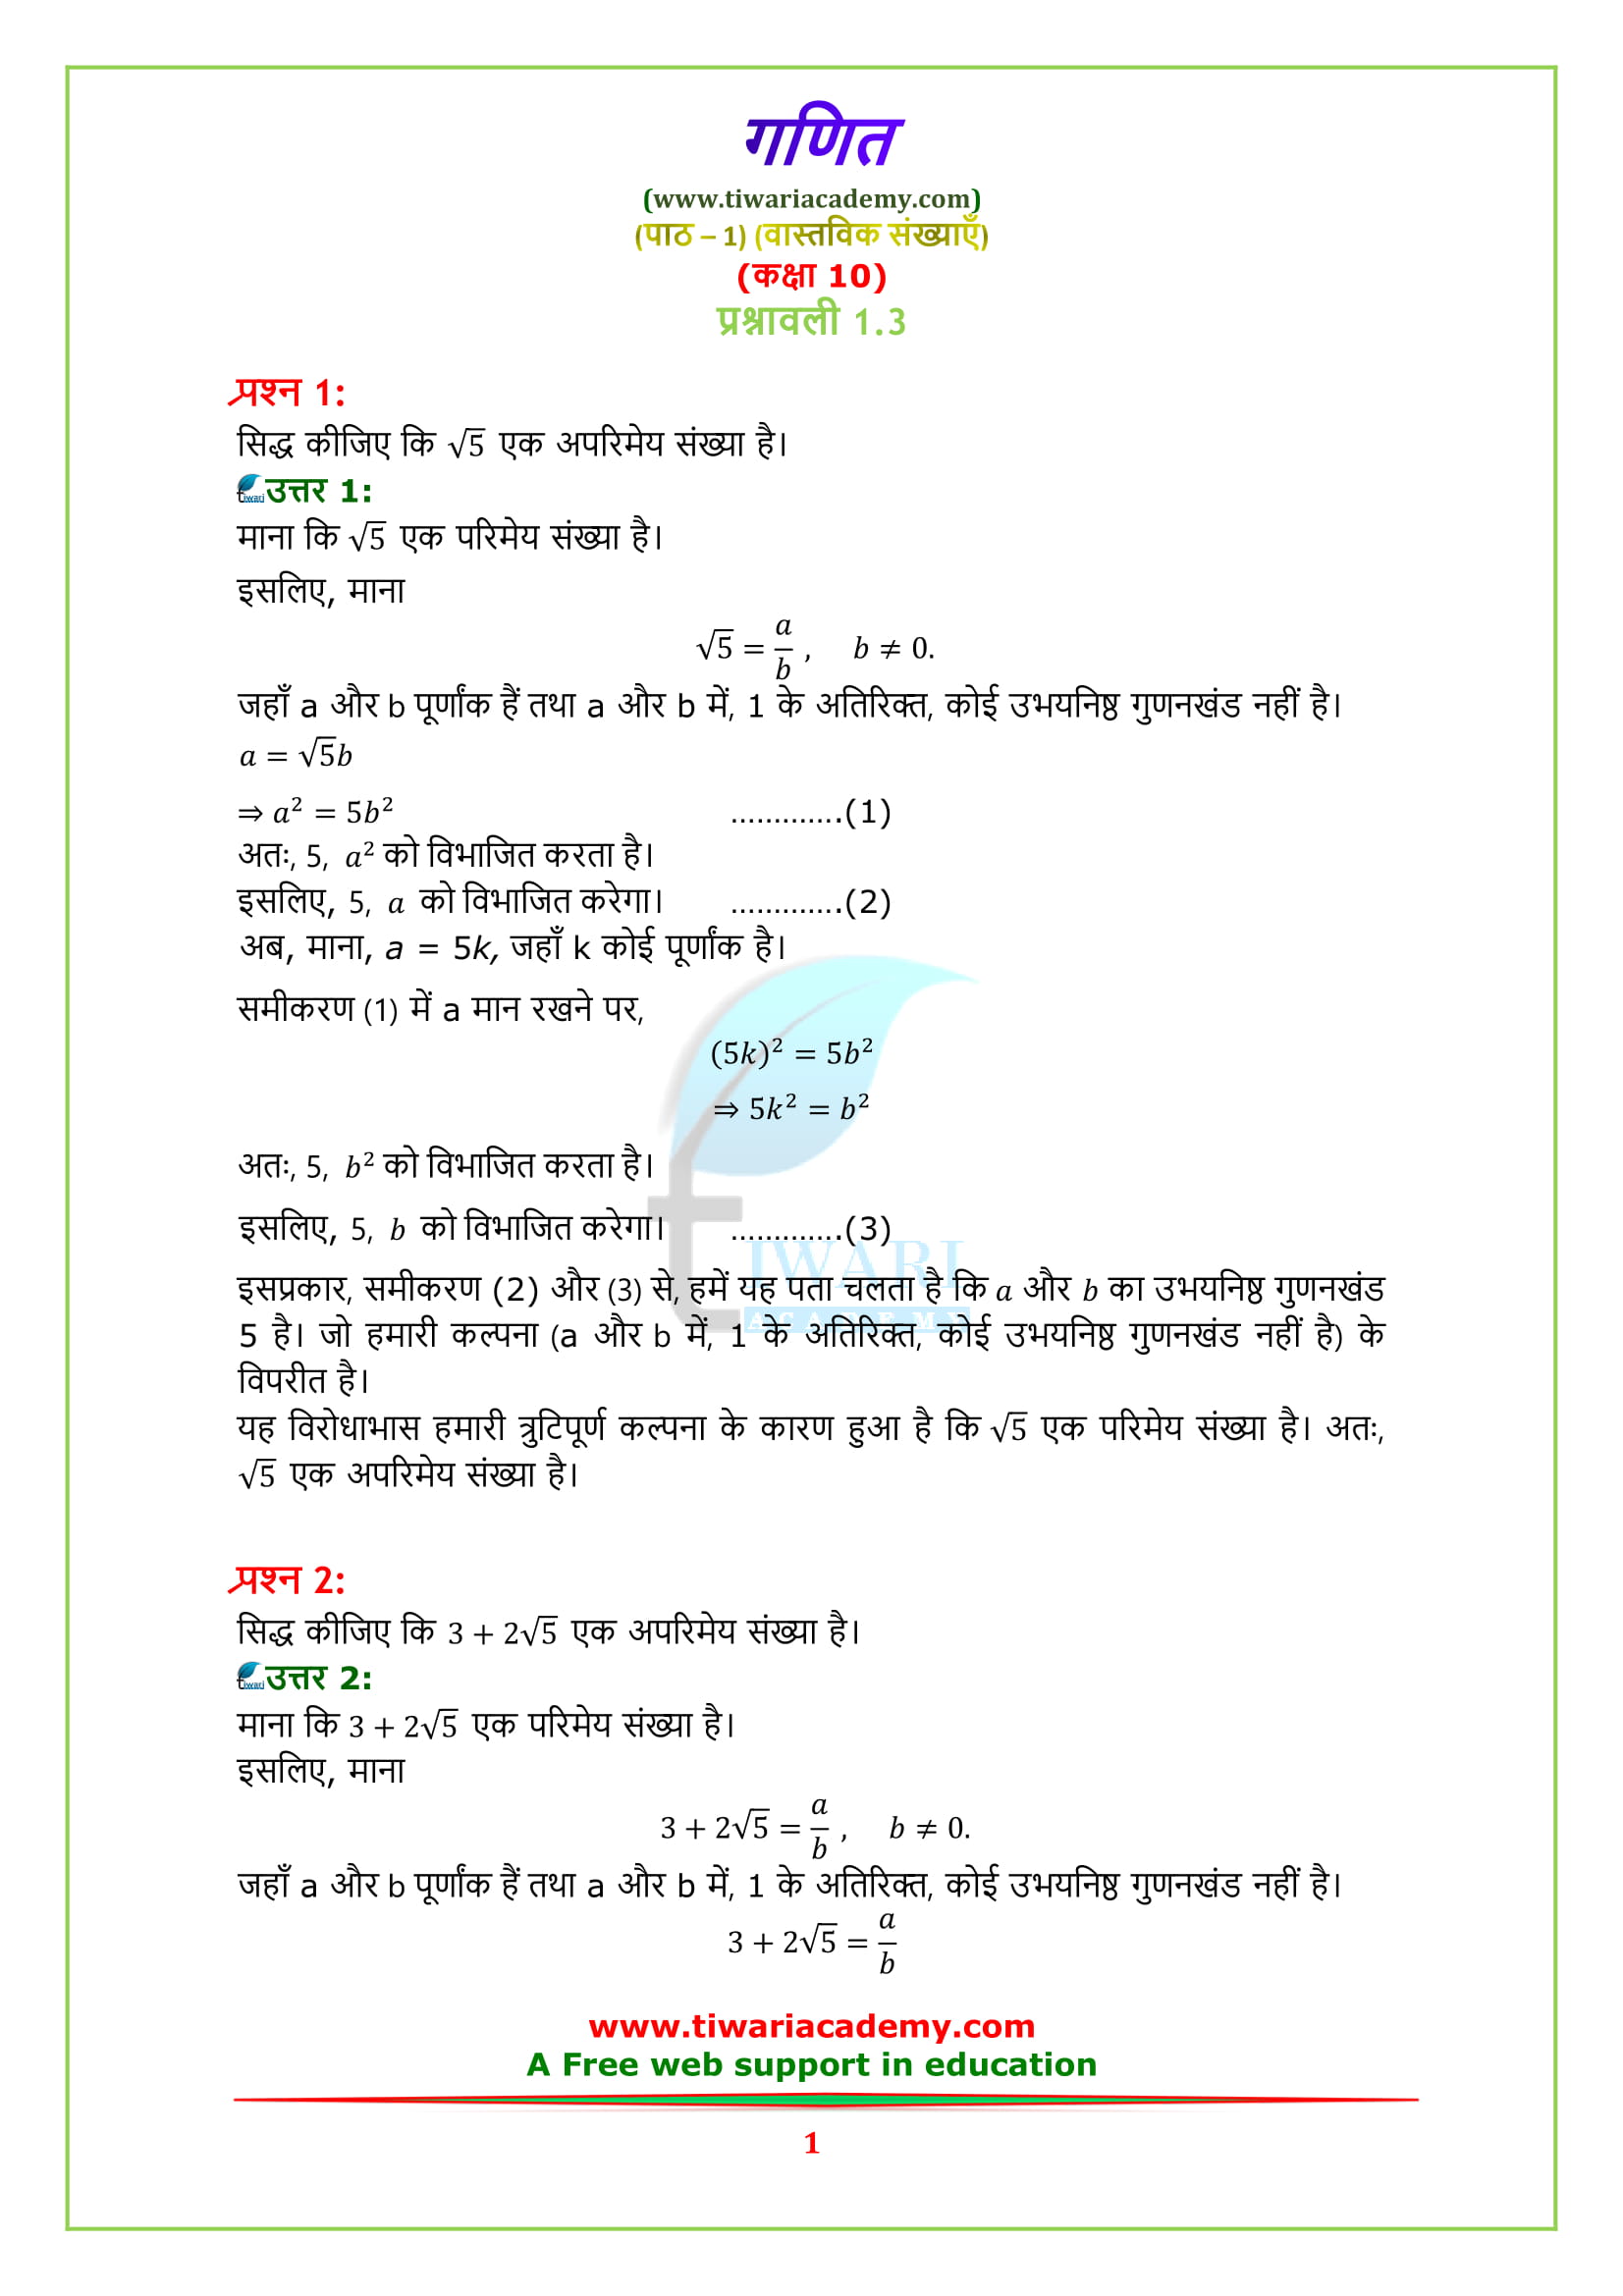 NCERT Solutions for class 10 Maths Chapter 1 Exercise 1.3